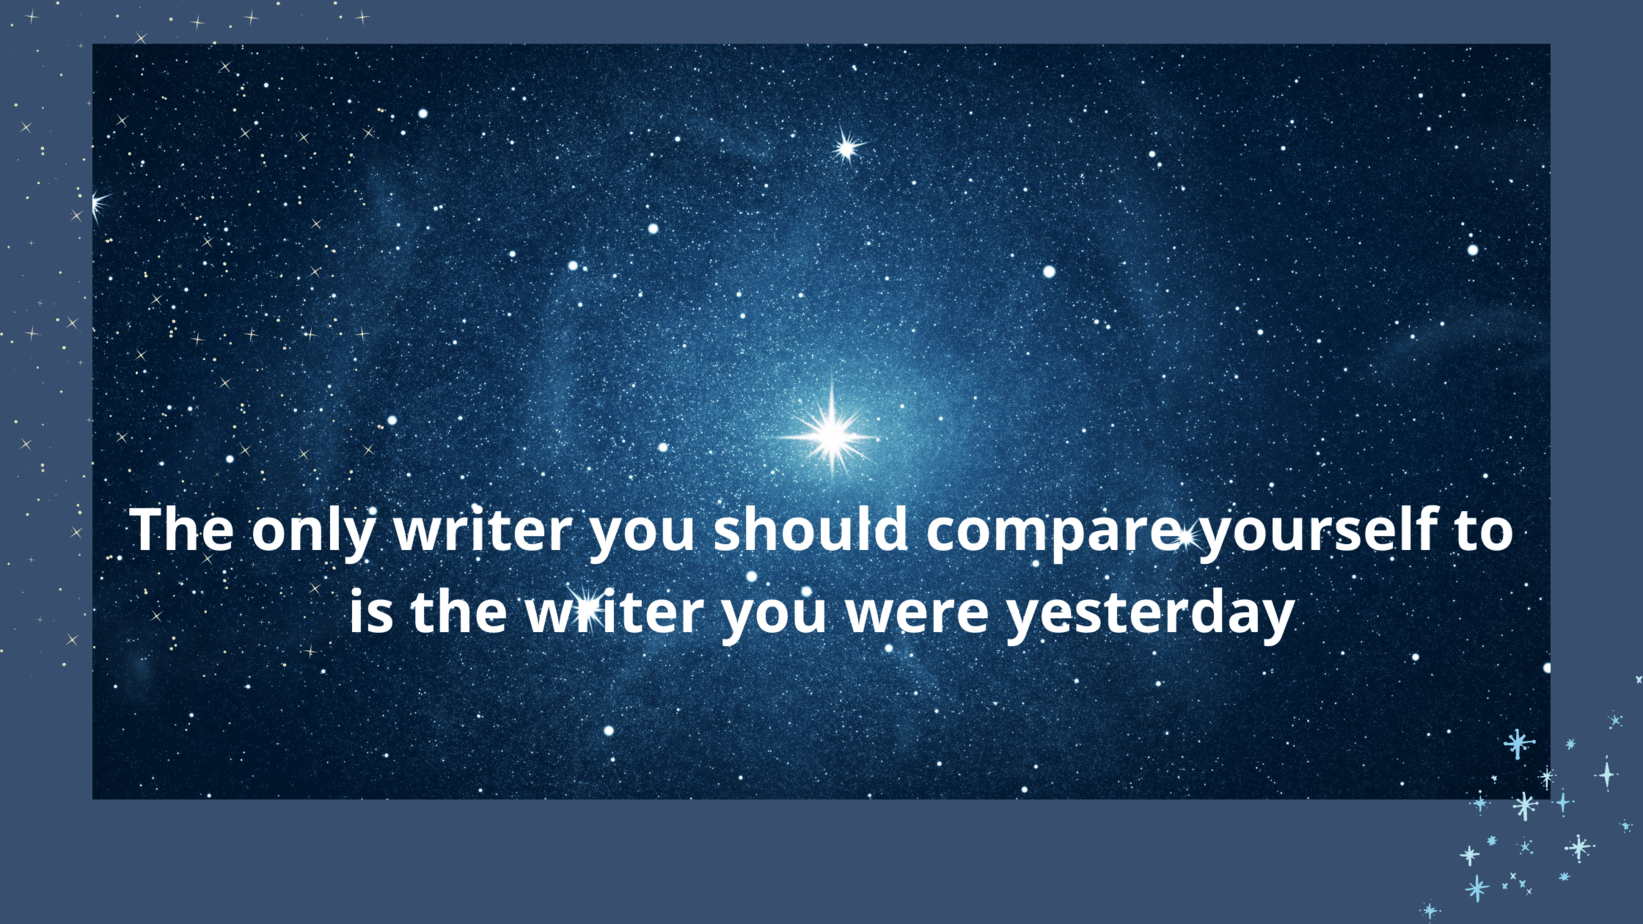 Navy galaxy as the background. White lettering reads The only writer you should compare yourself to is the writer you were yesterday.